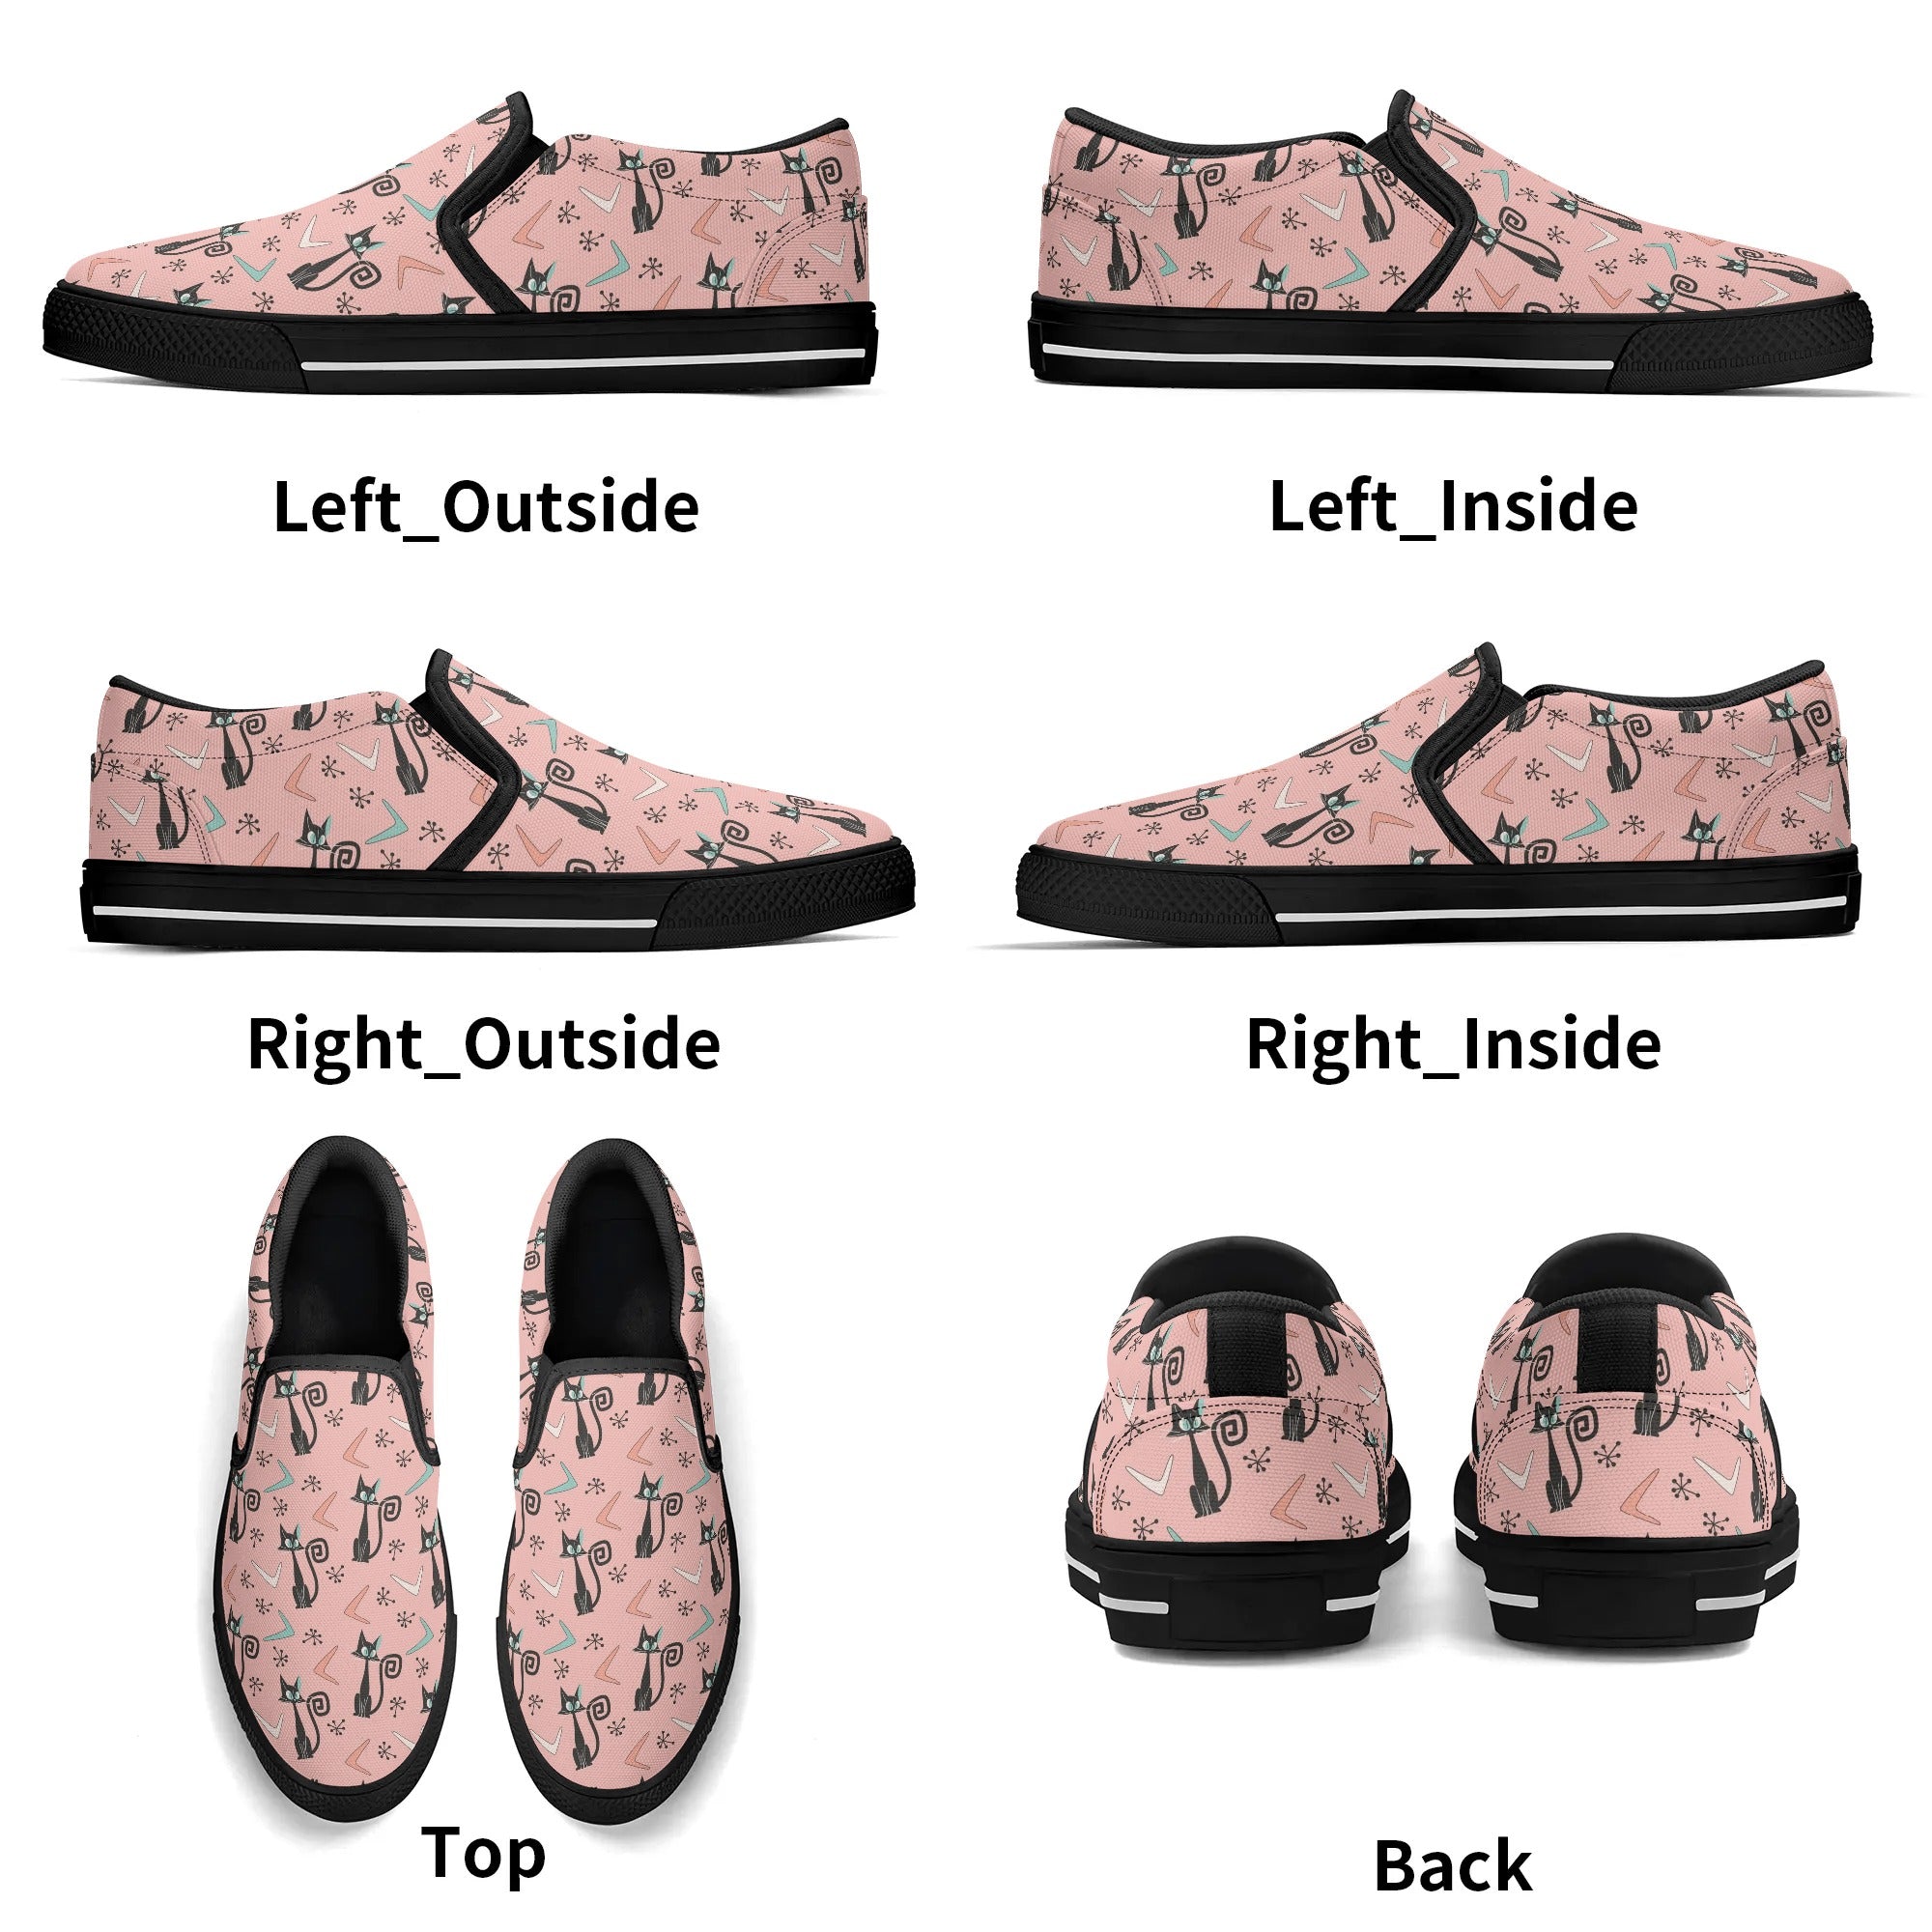 Atomic Kittie Kitschy Cat, Mid Mod Womens  Slip On Loafer Shoes